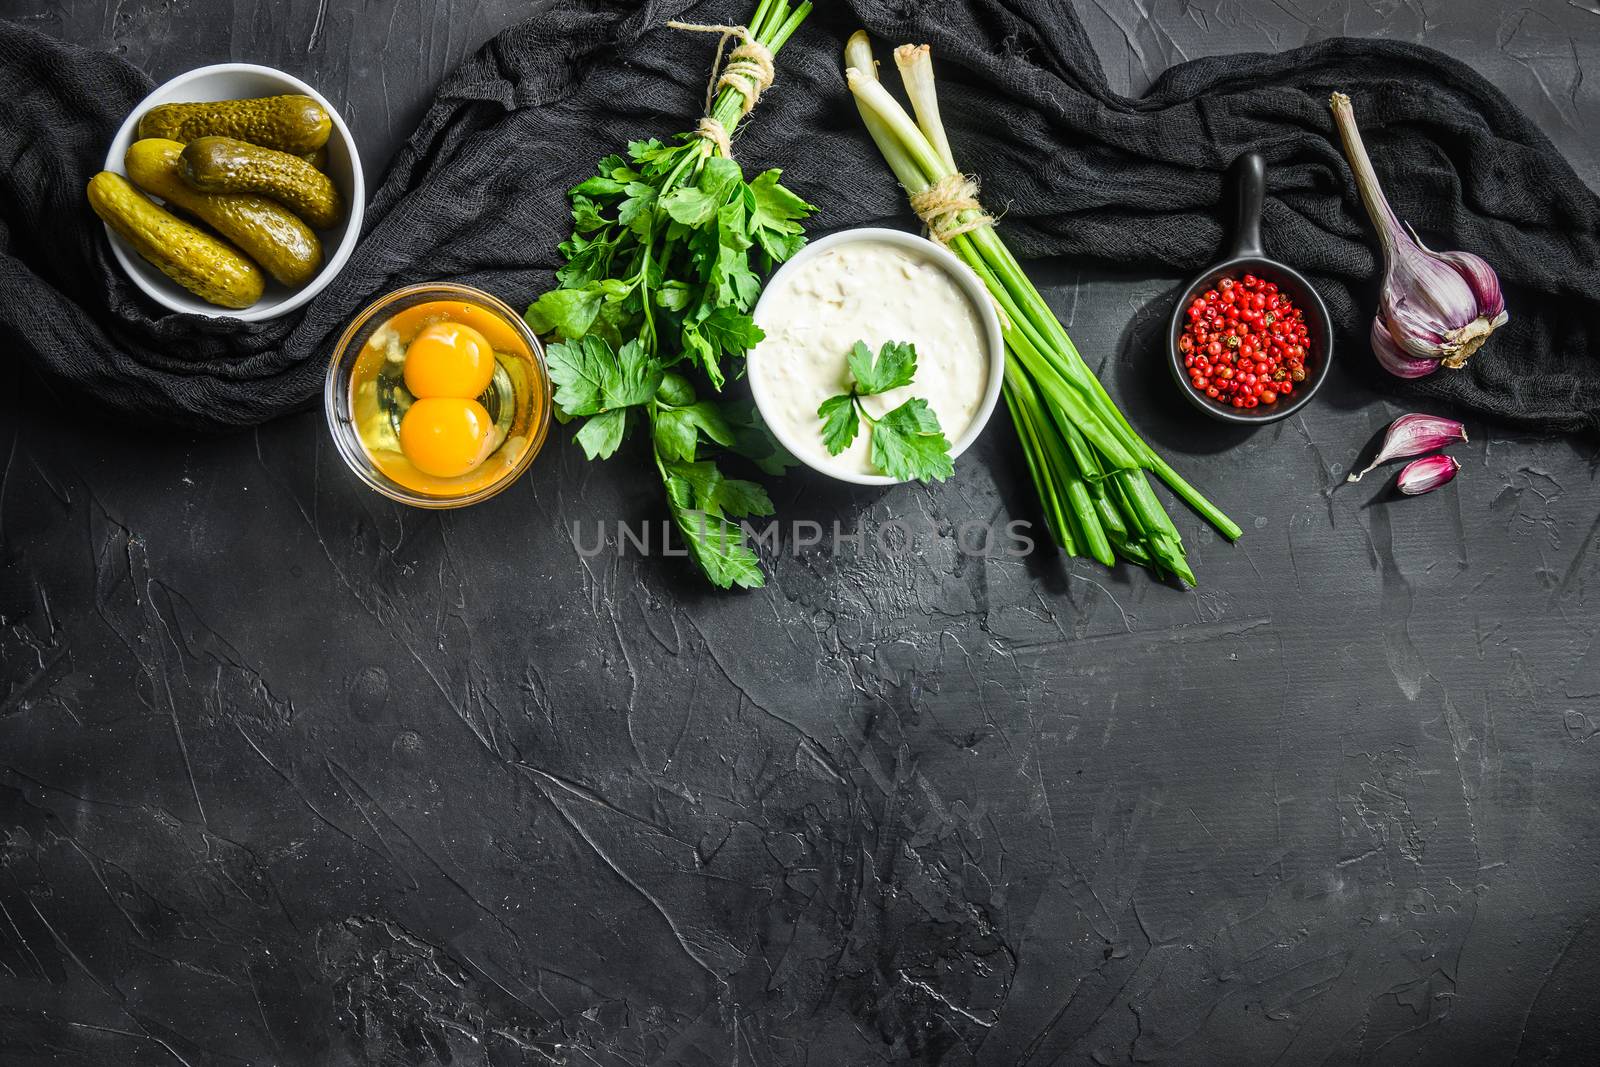 Ranch sauce organic bio tartare in a white porcelain bowl with vegetables, herbs and spices on old textured black stone table top view horisontal concept space for text in bottom.